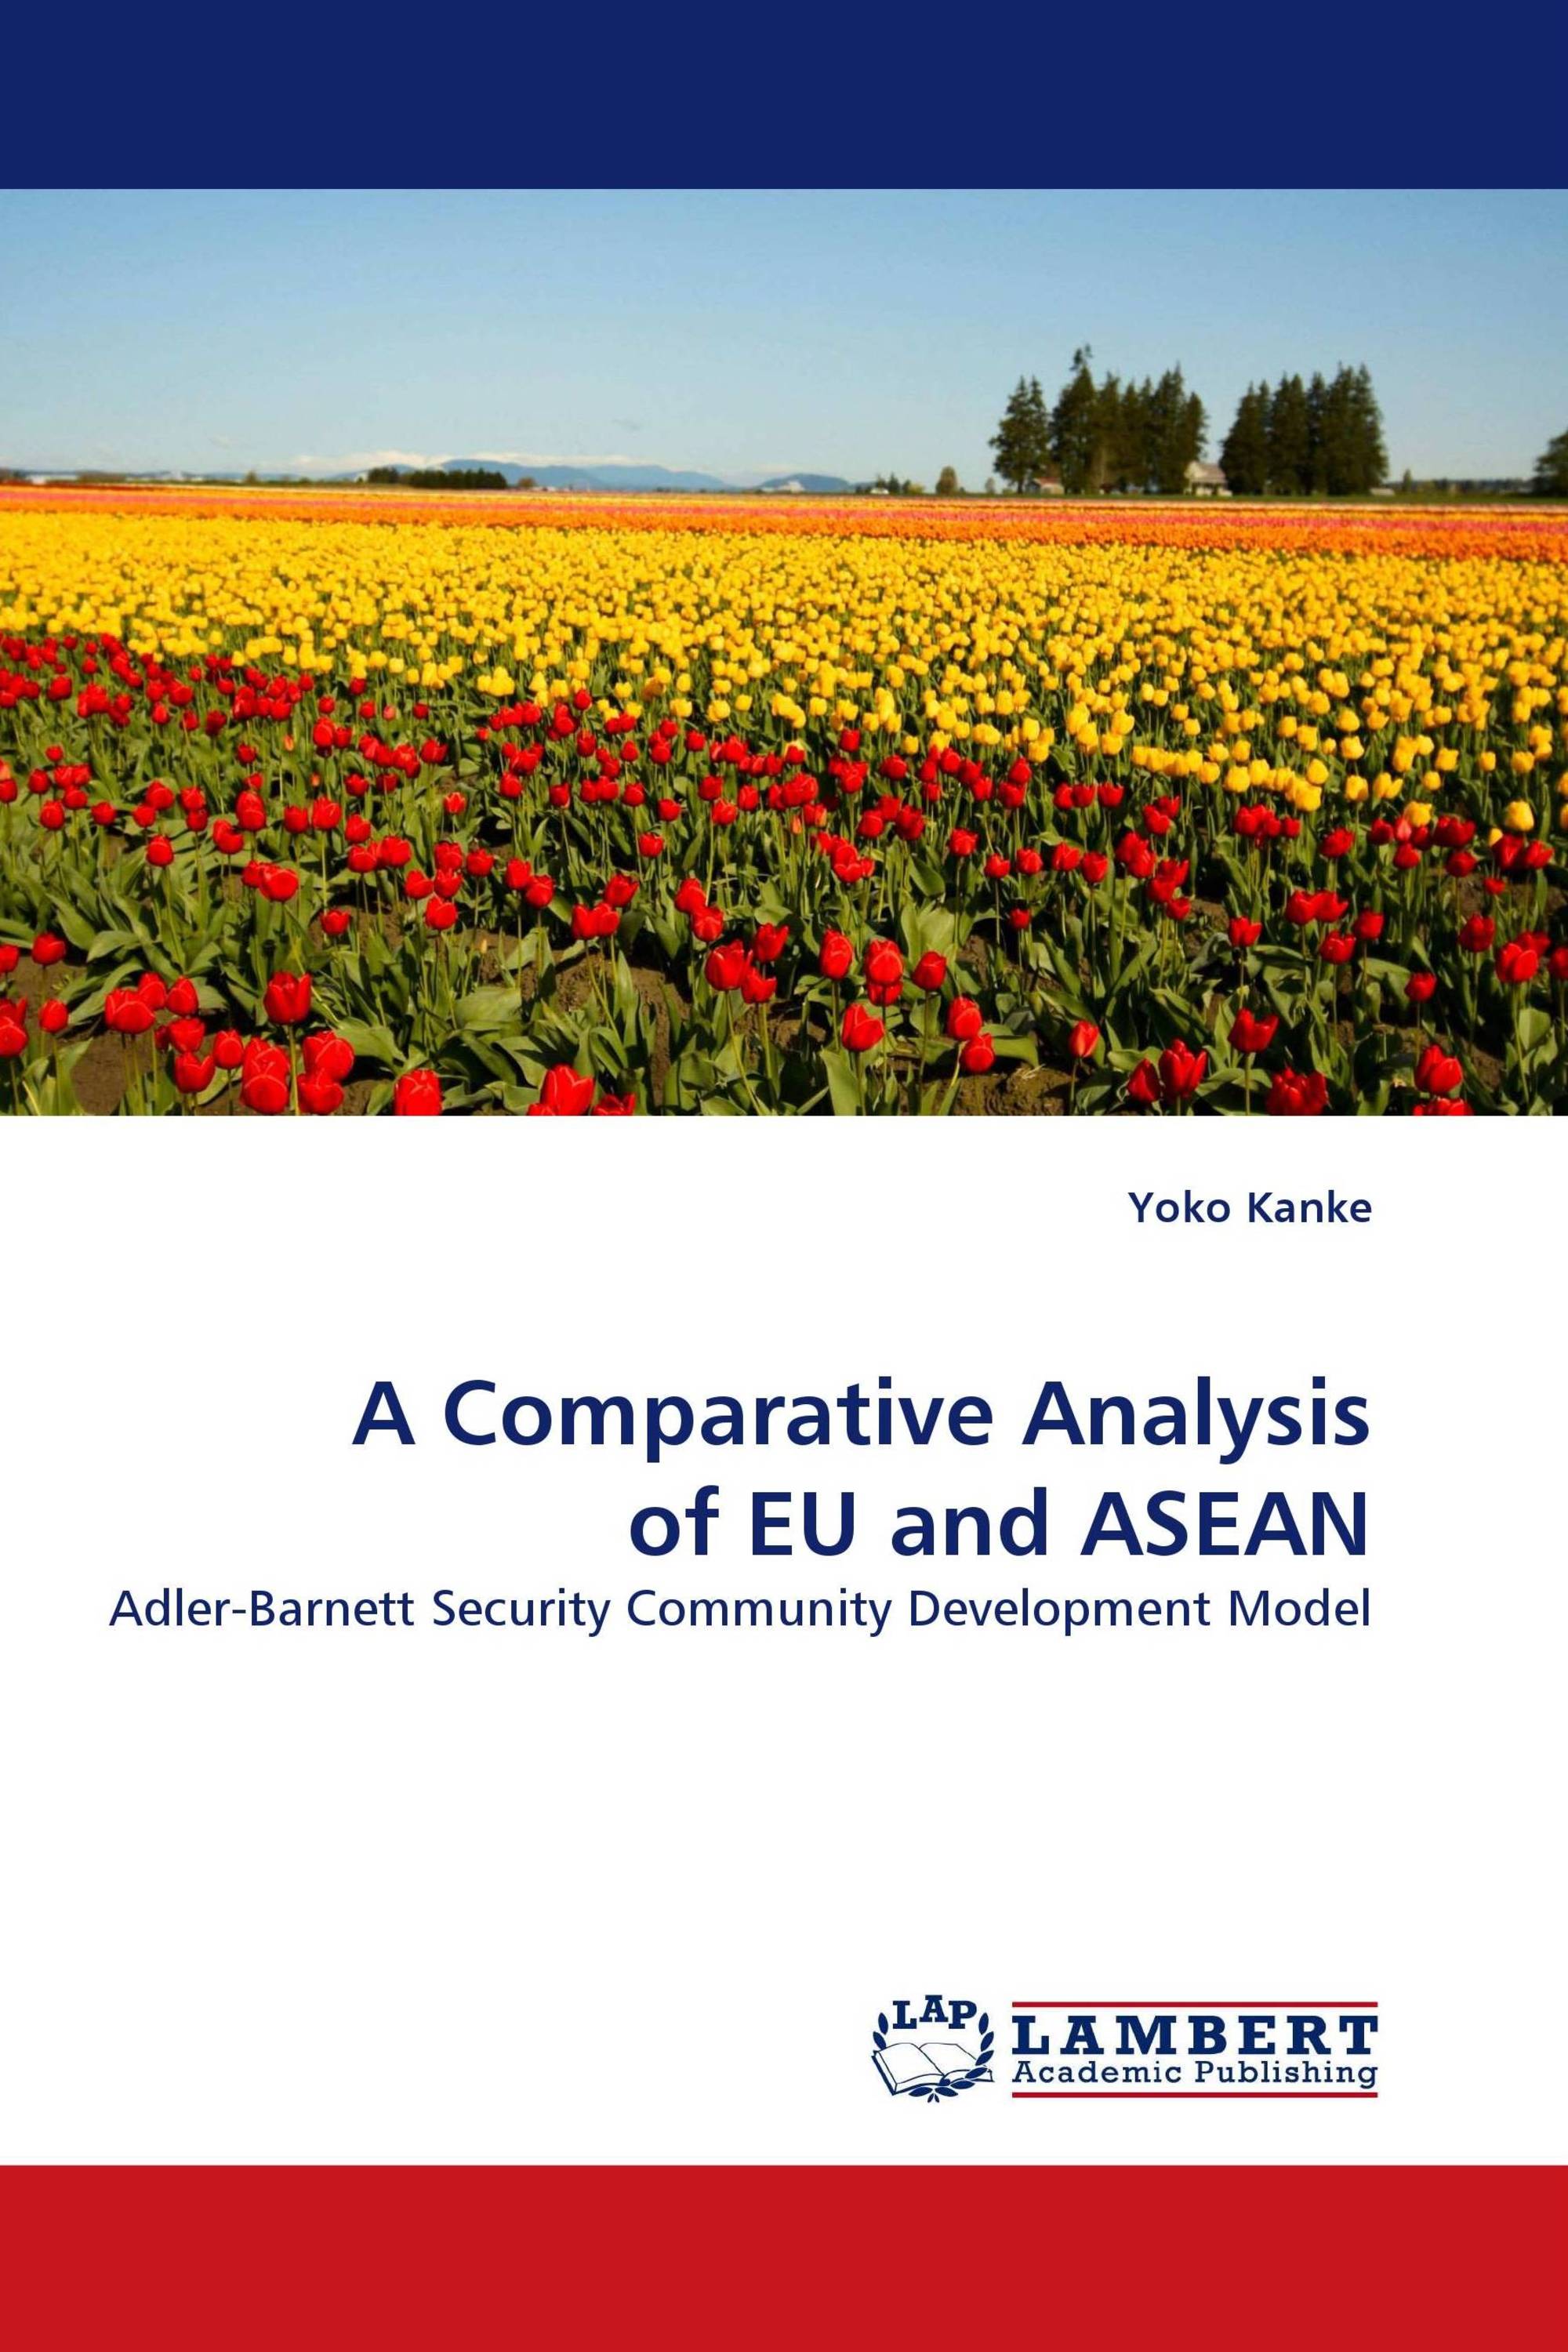 A Comparative Analysis of EU and ASEAN